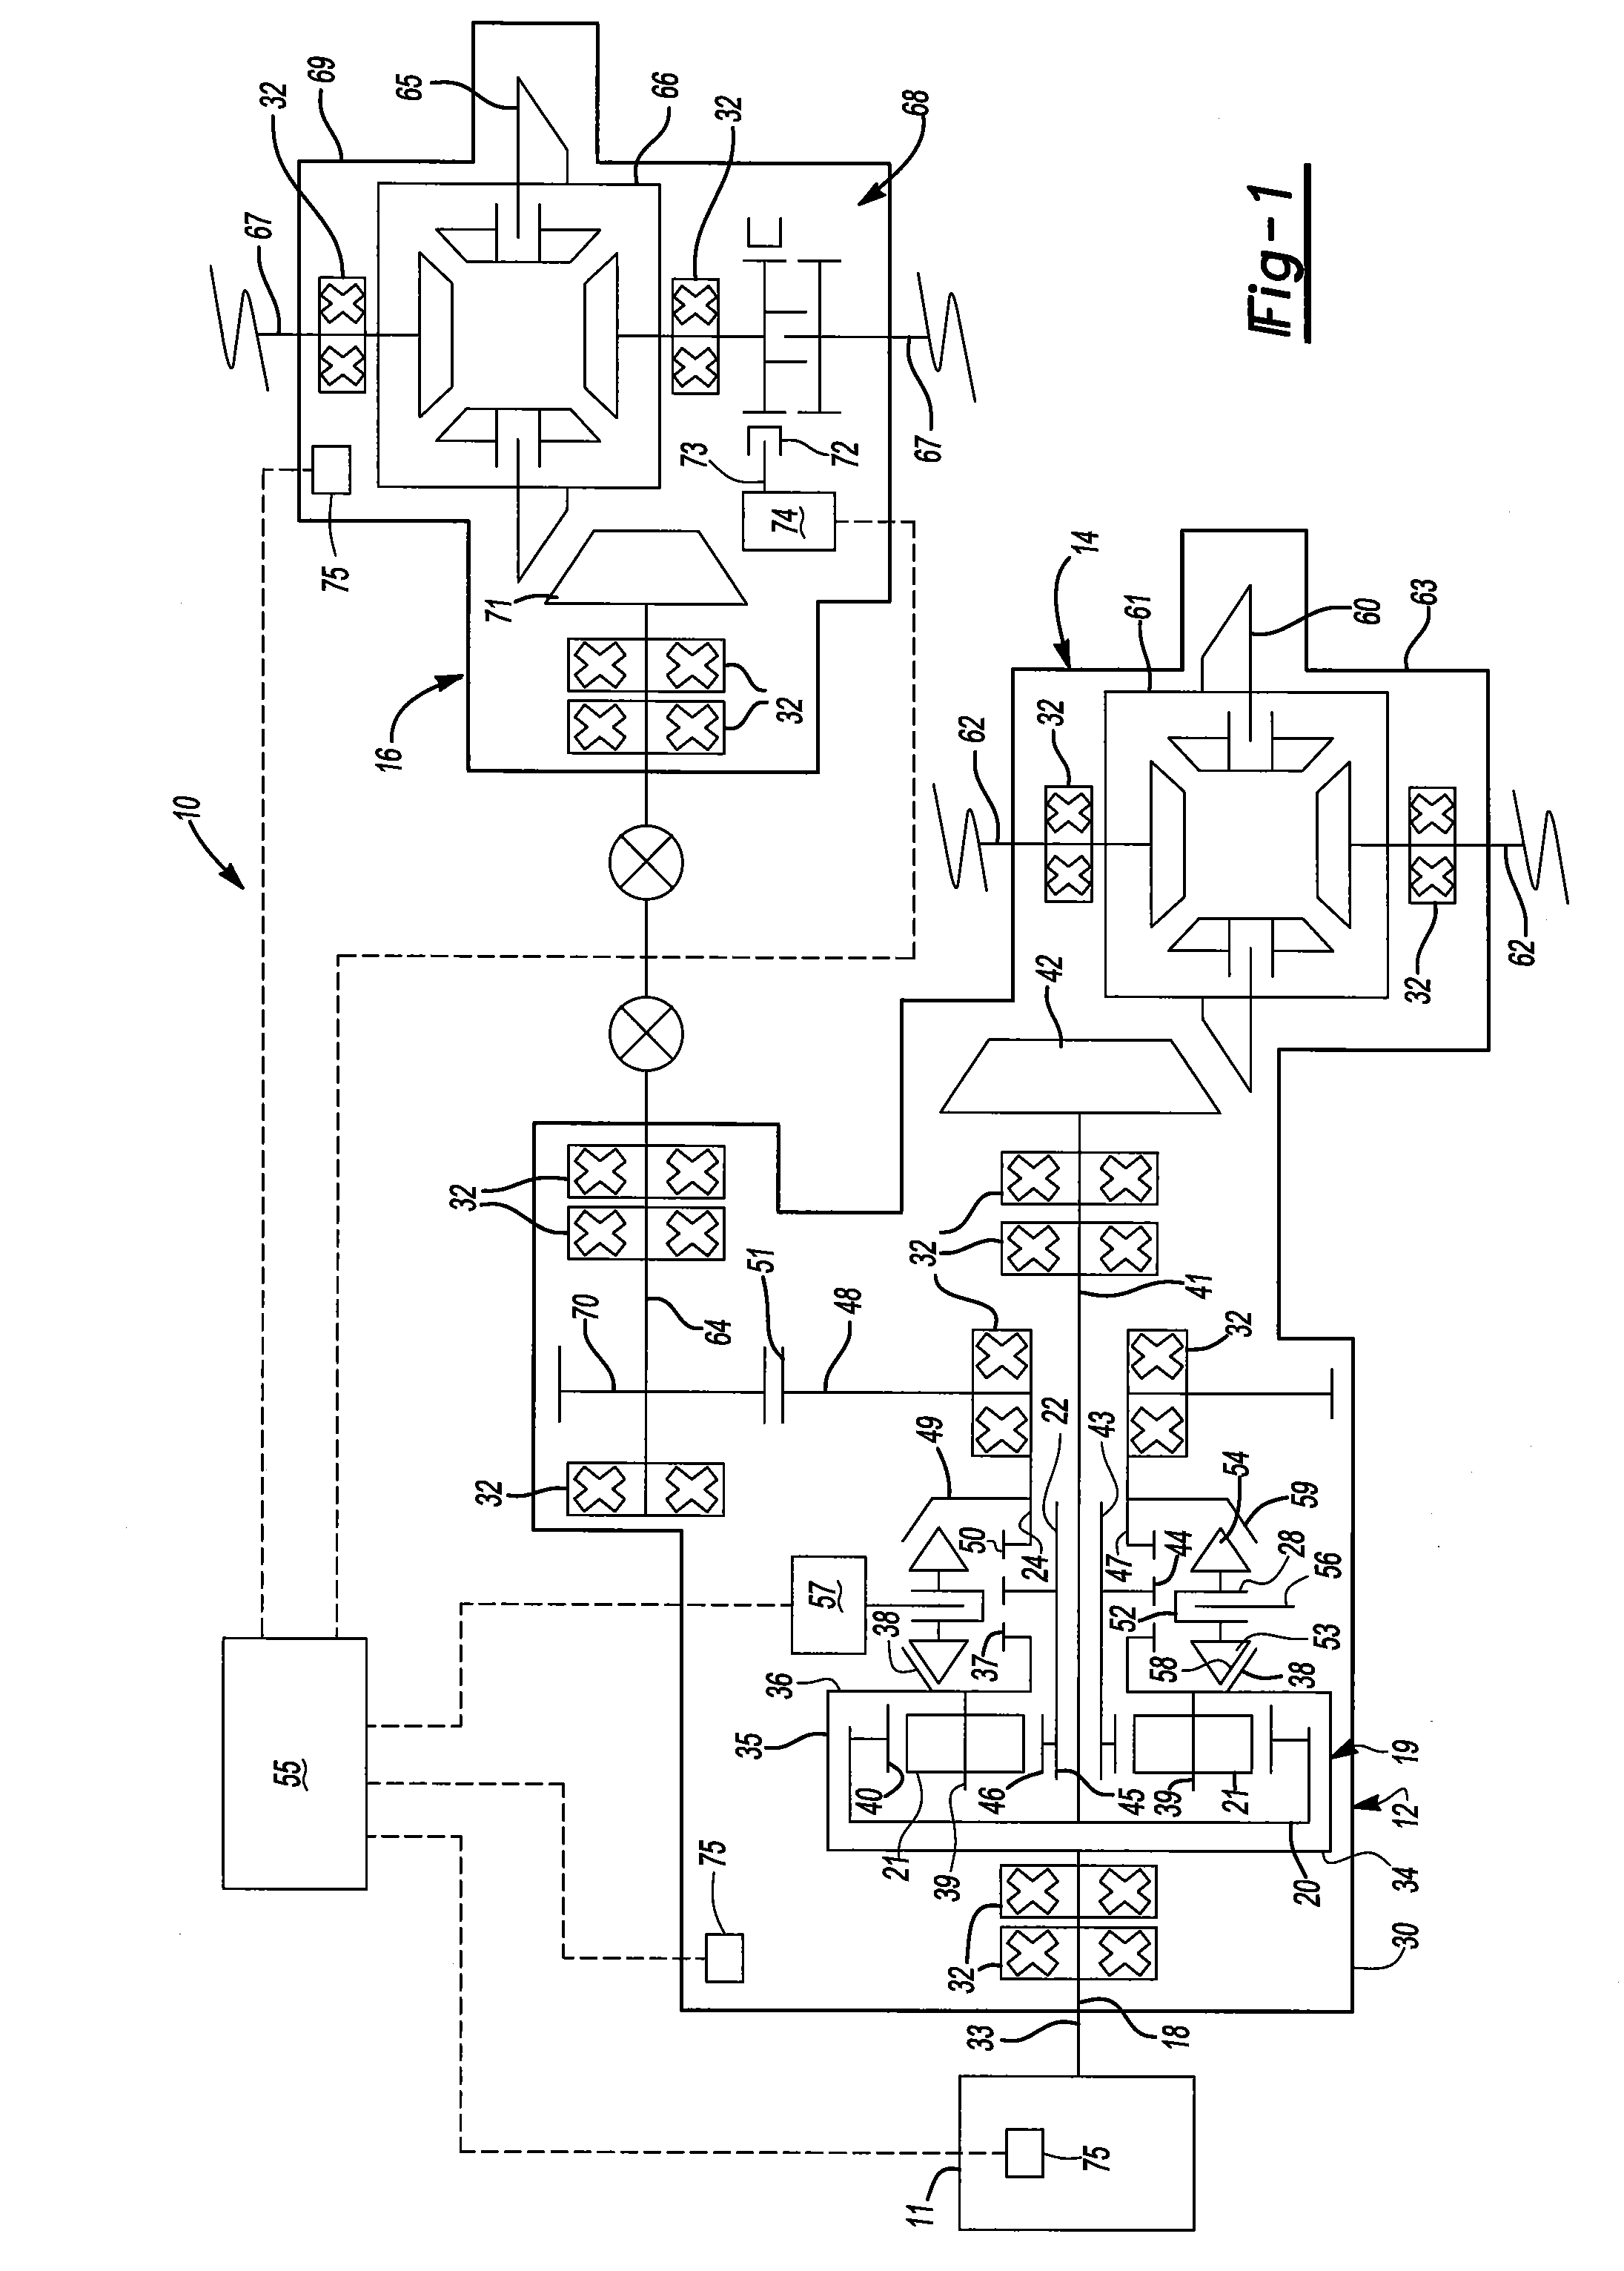 Method of Shifting a Tandem Drive Axle Having an Inter-Axle Differential